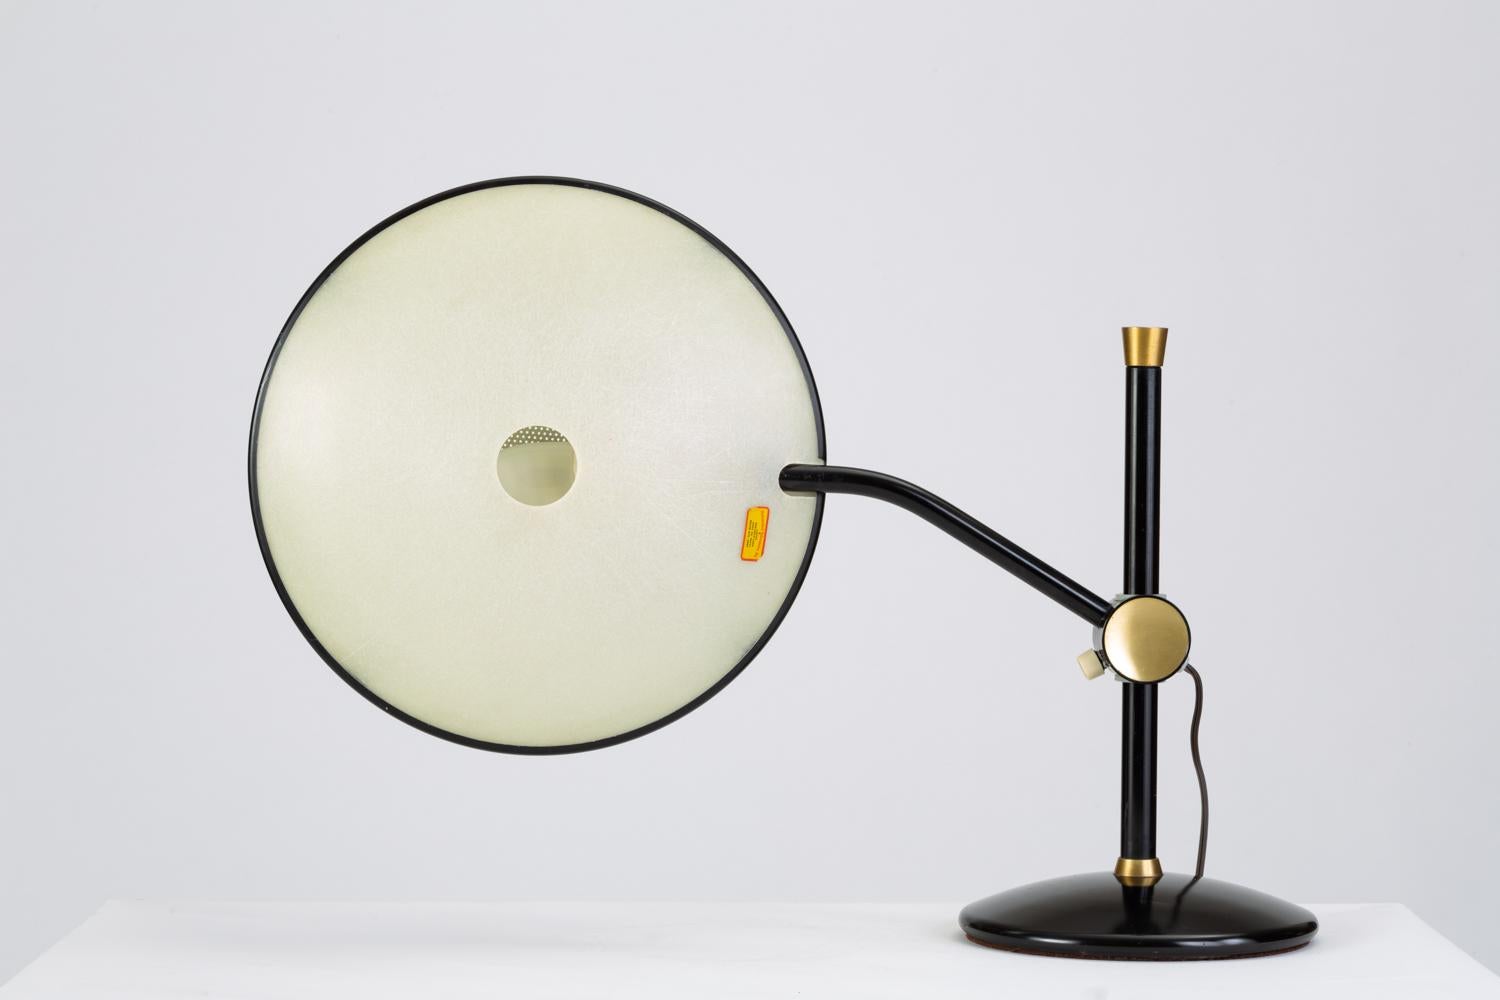 Black-Enameled Desk Lamp with Brass Accents by Dazor 1